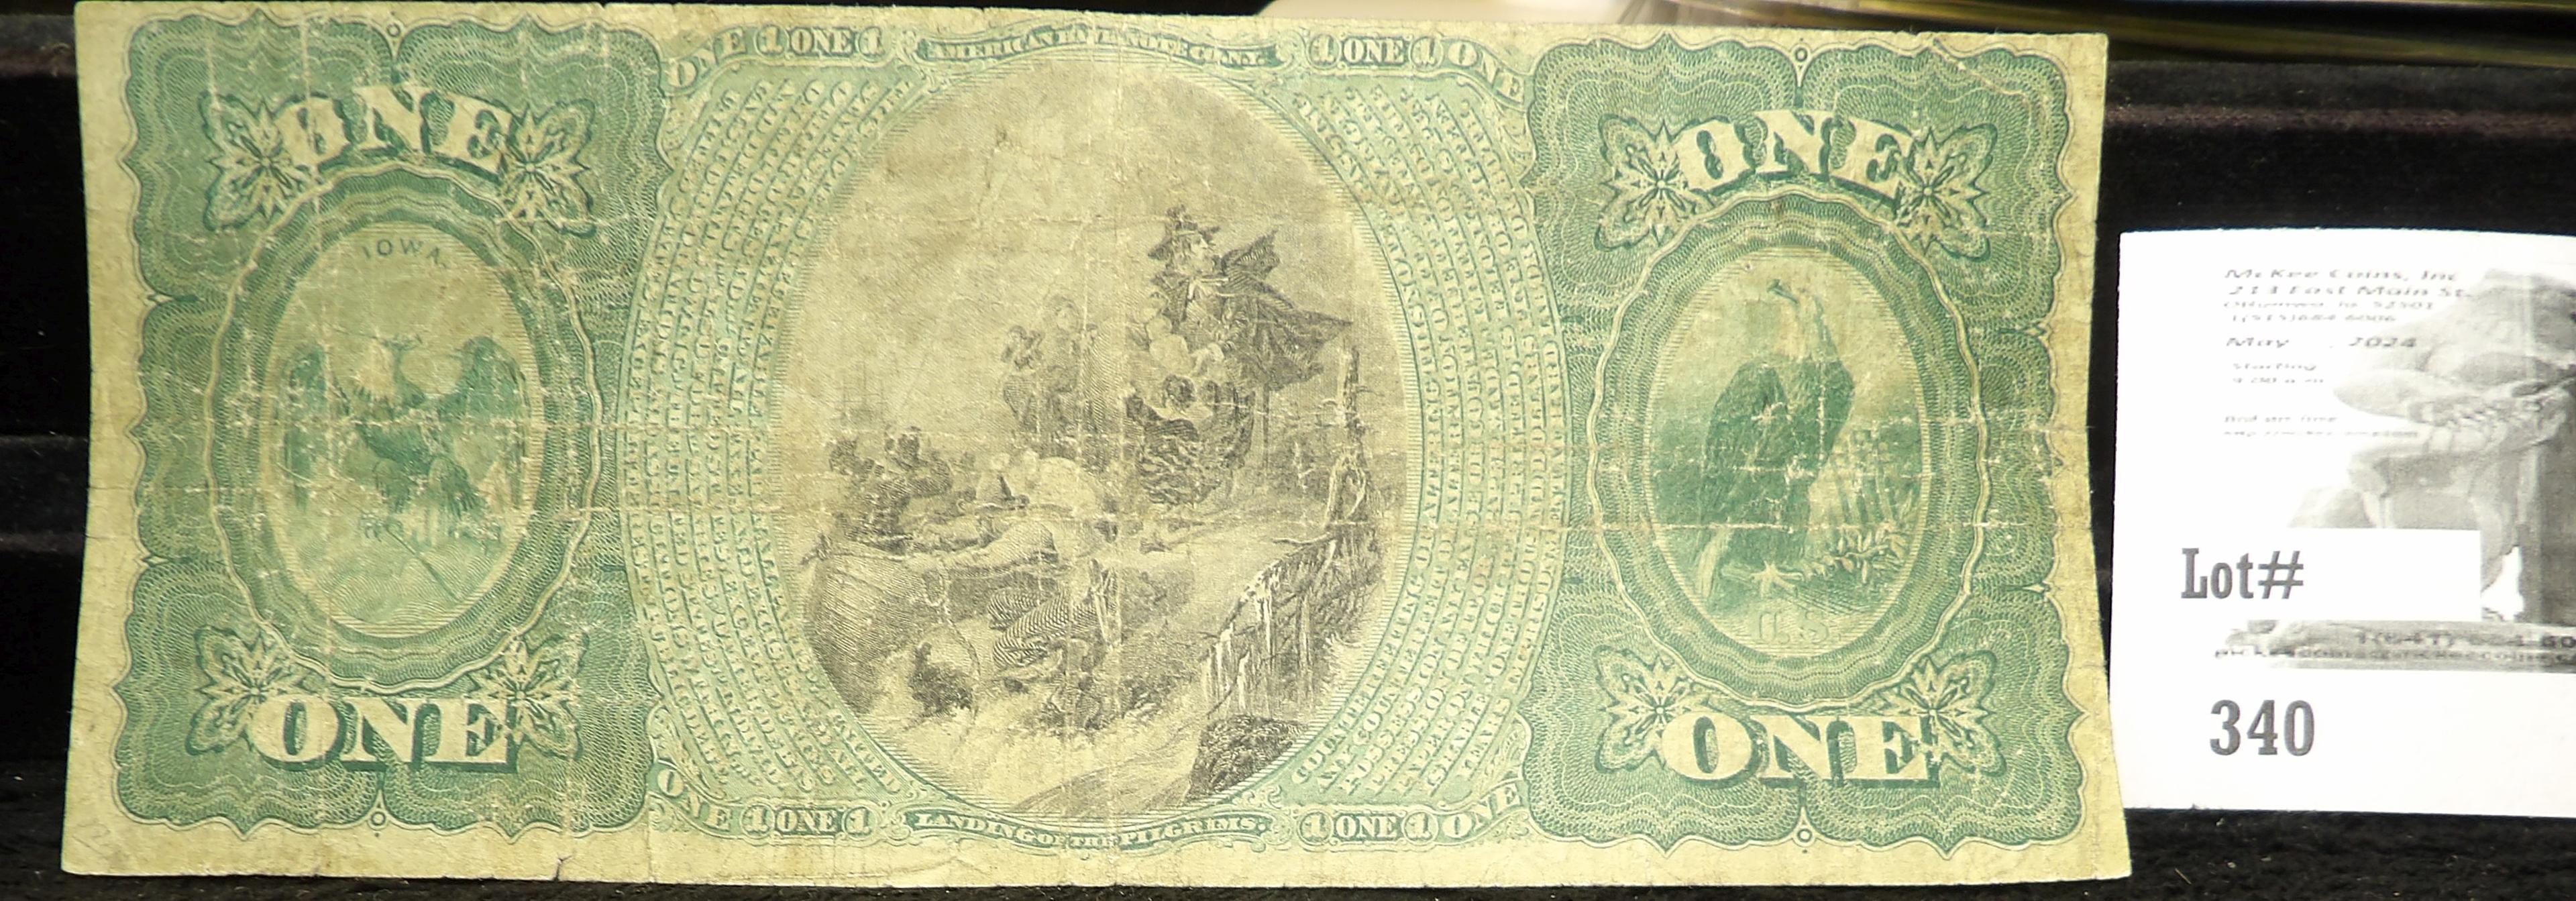 June 15th, 1872 First Charter National Banknote The Keokuk National Bank State of Iowa, Charter No.